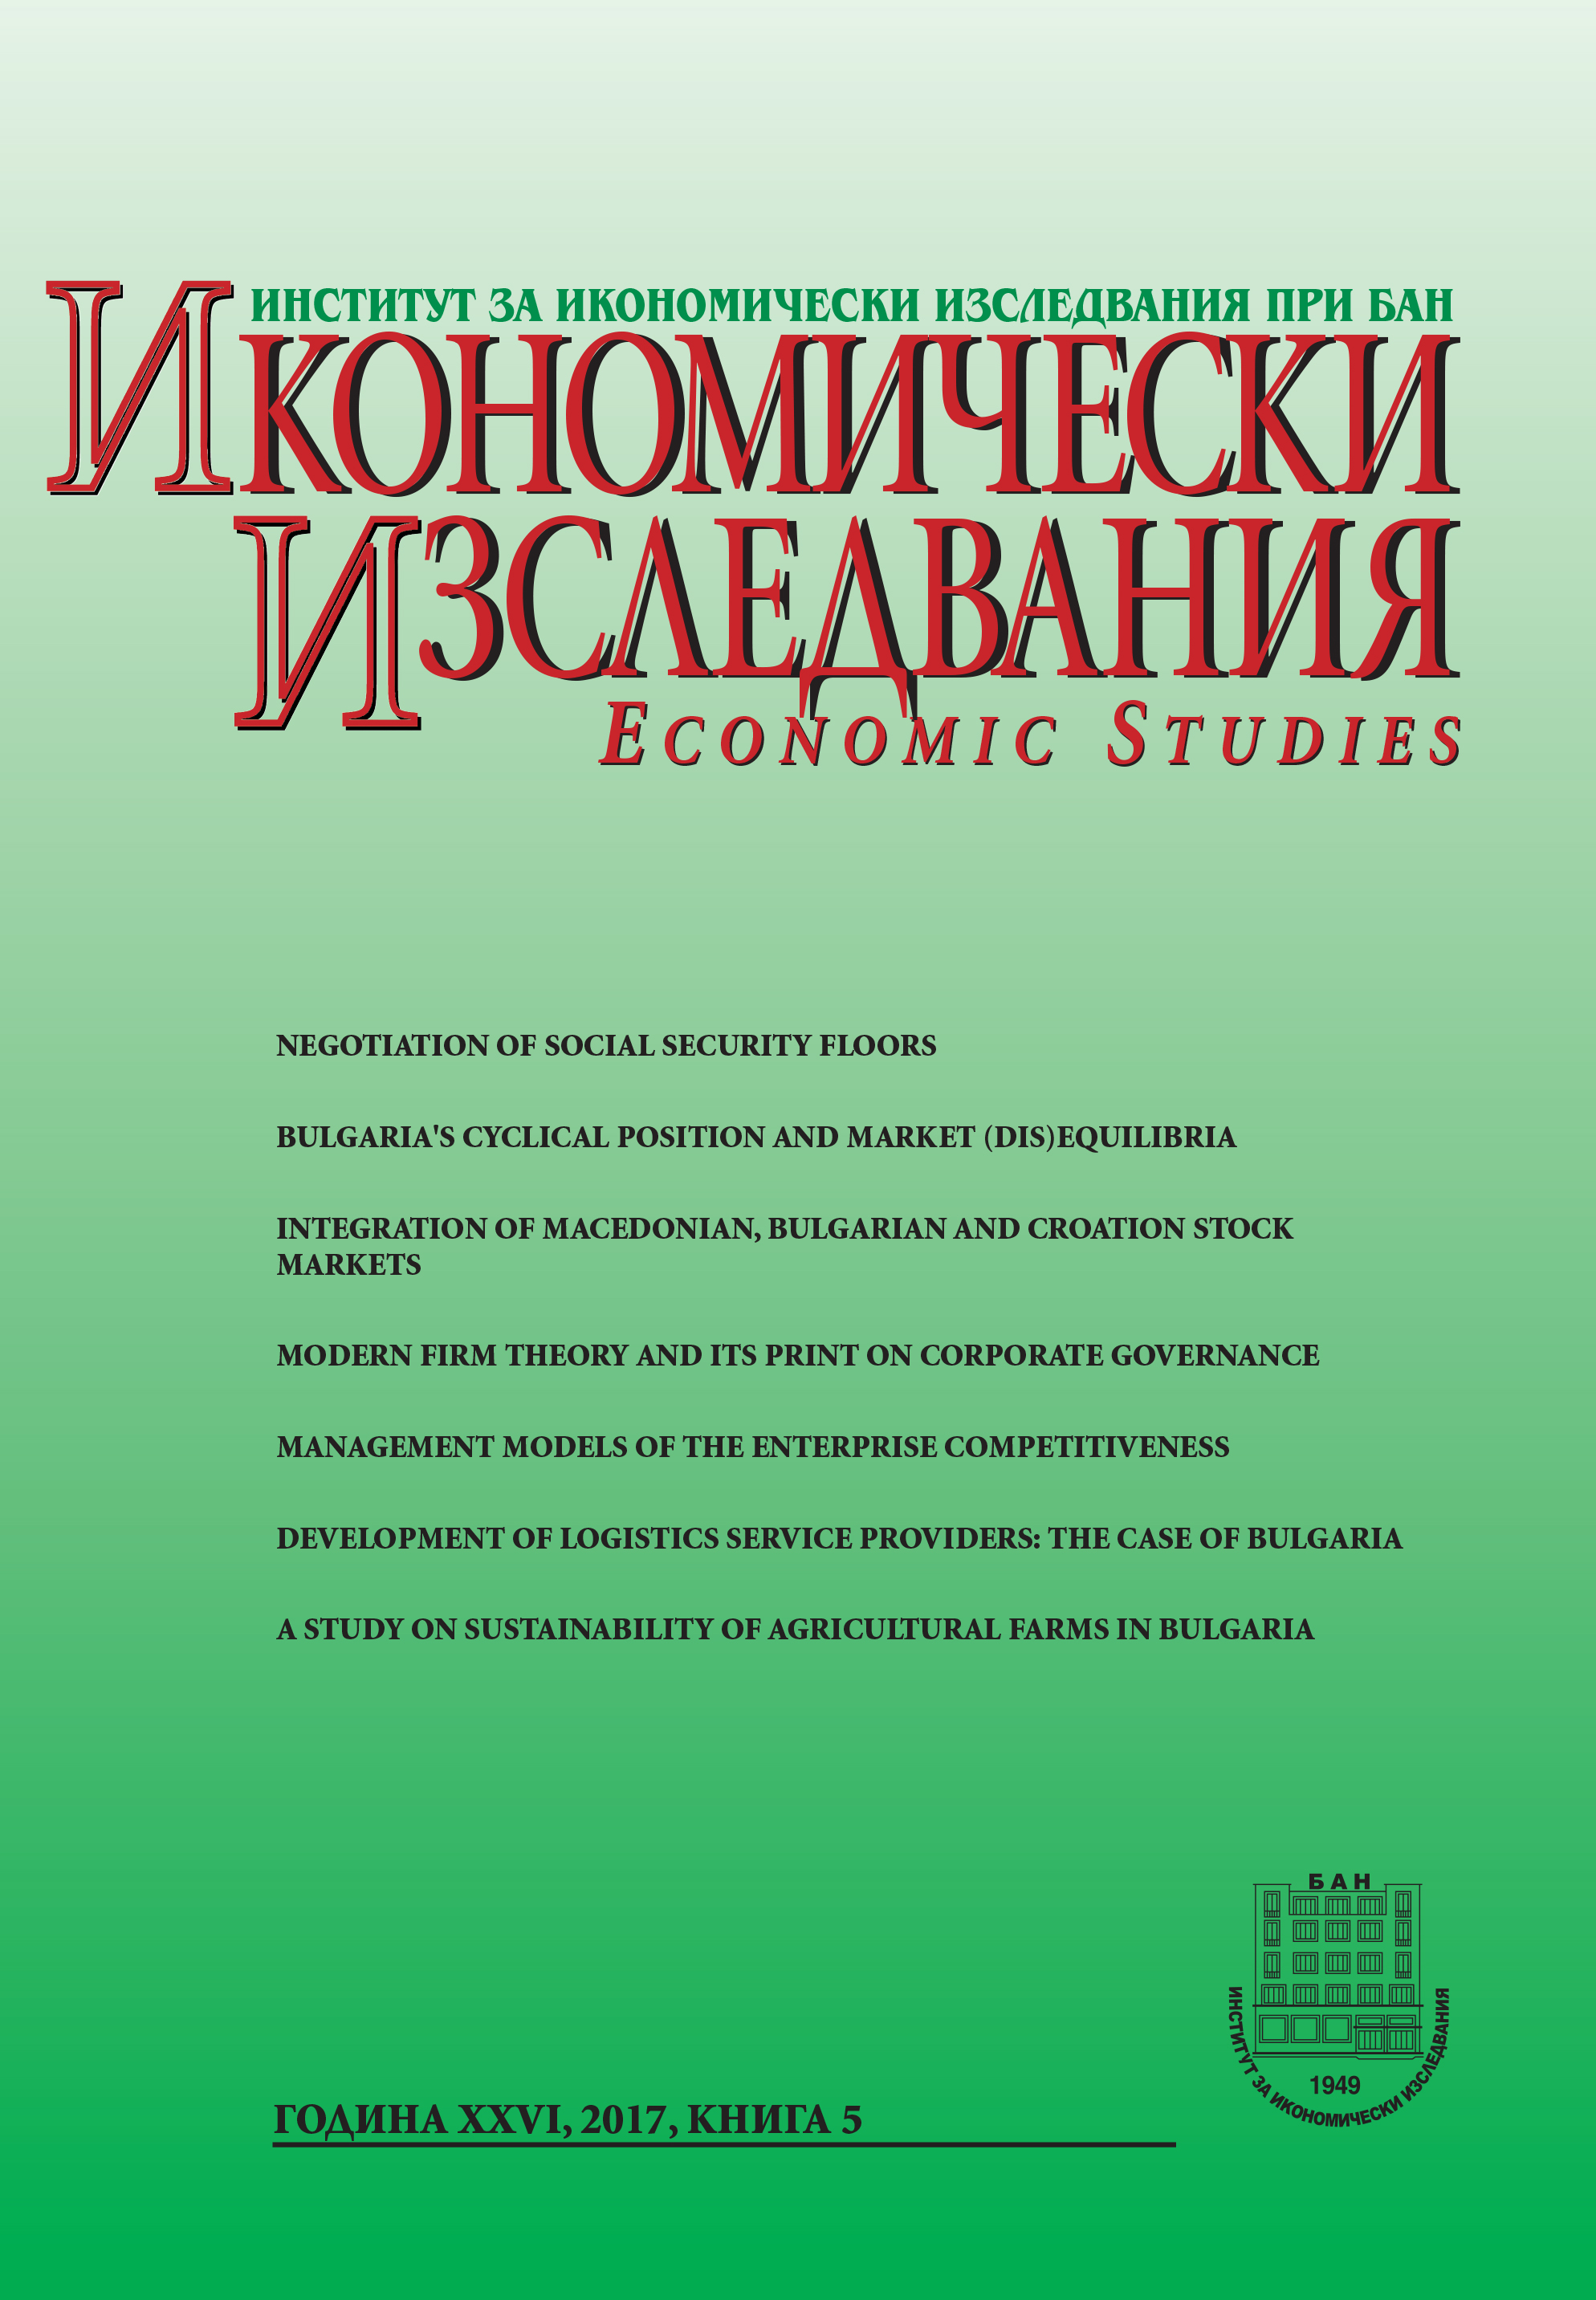 Phases of the Development of Logistics Service Providers: The Case of Bulgaria Cover Image